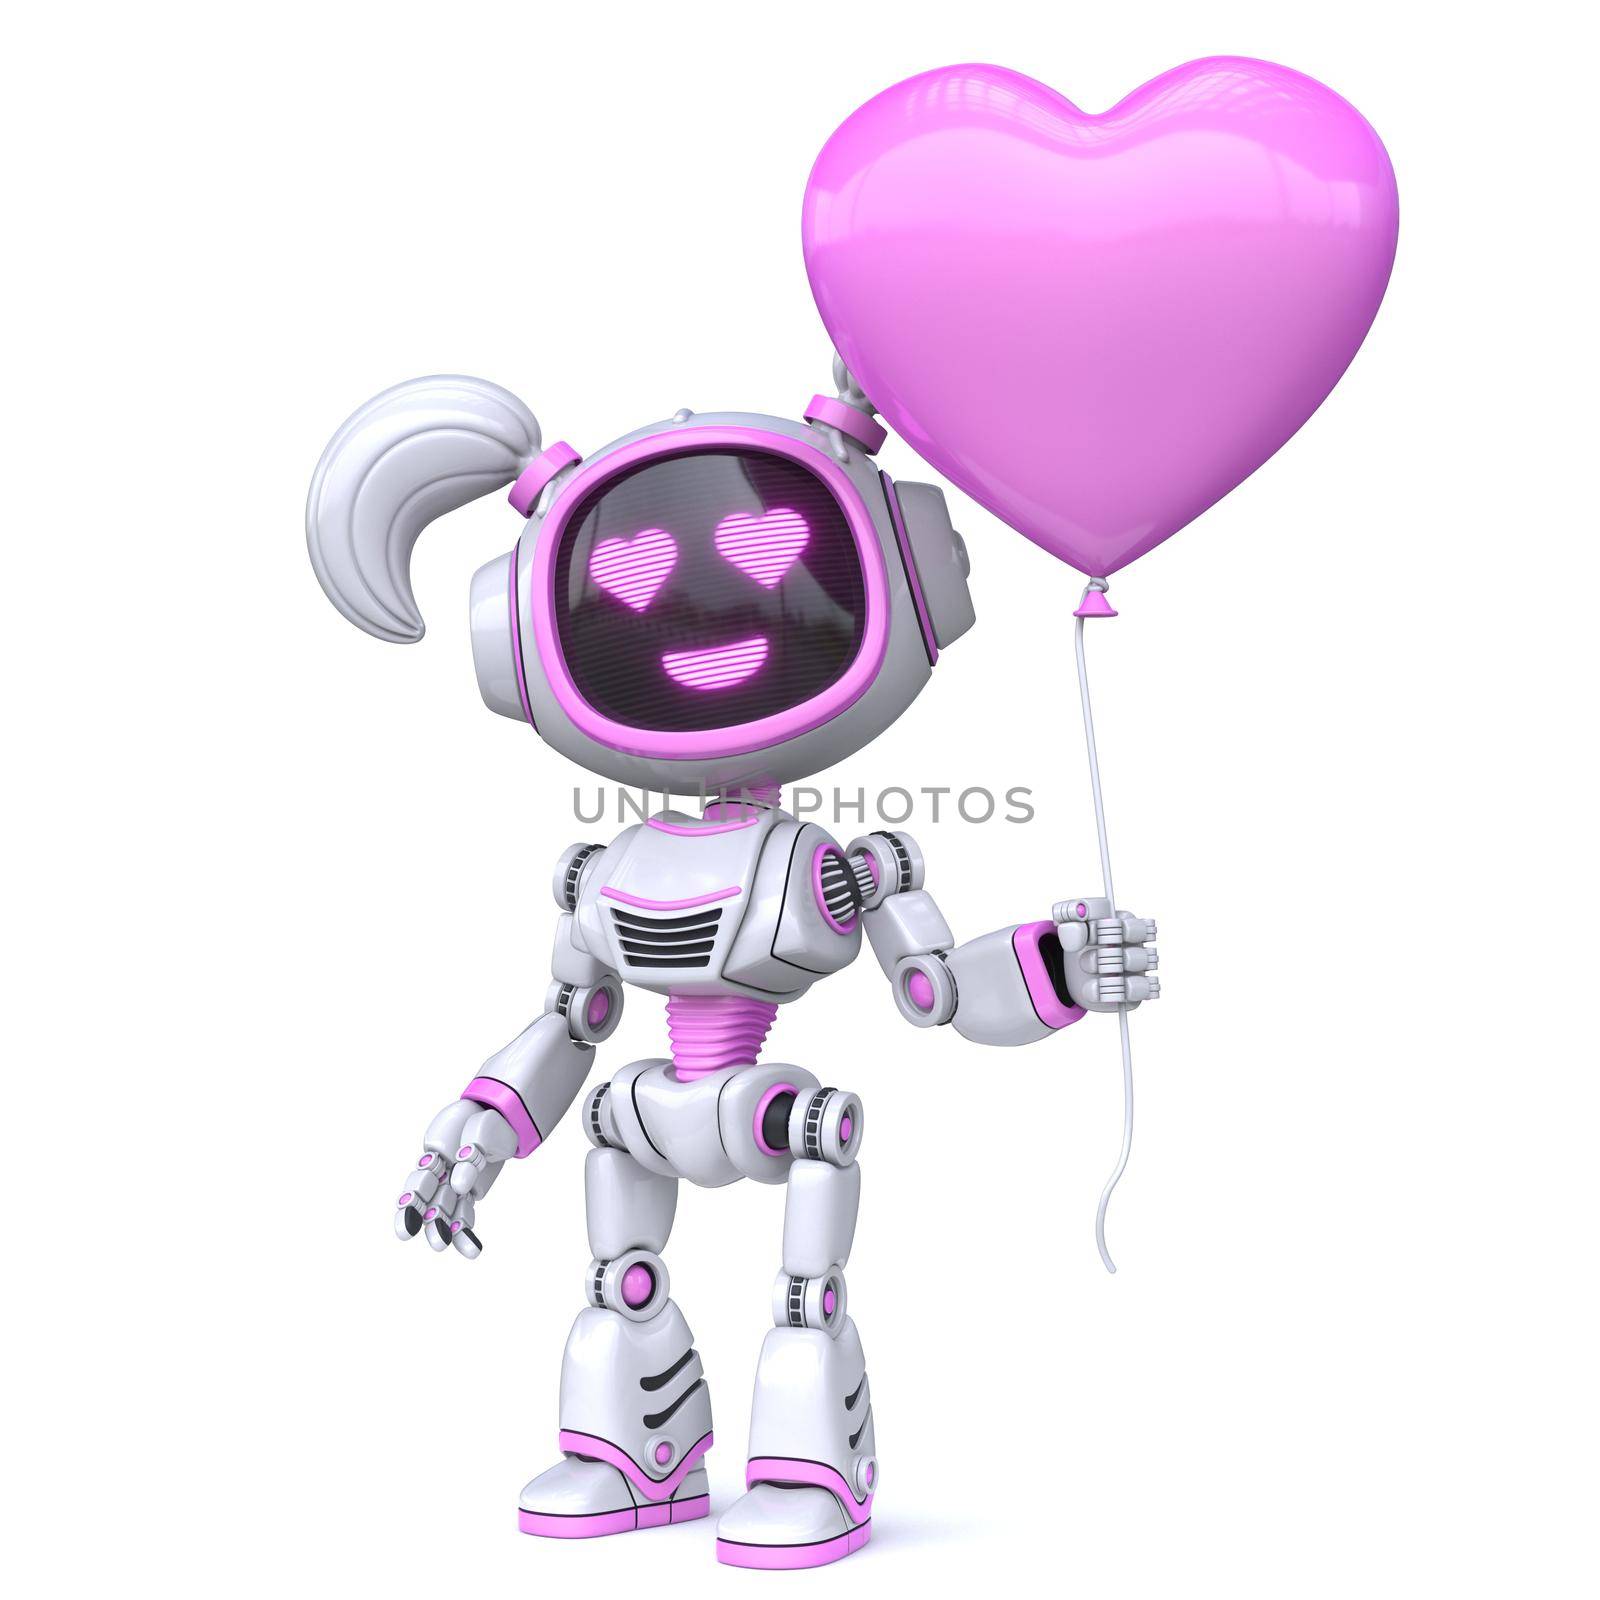 Cute pink girl robot hold heart shaped balloon 3D by djmilic